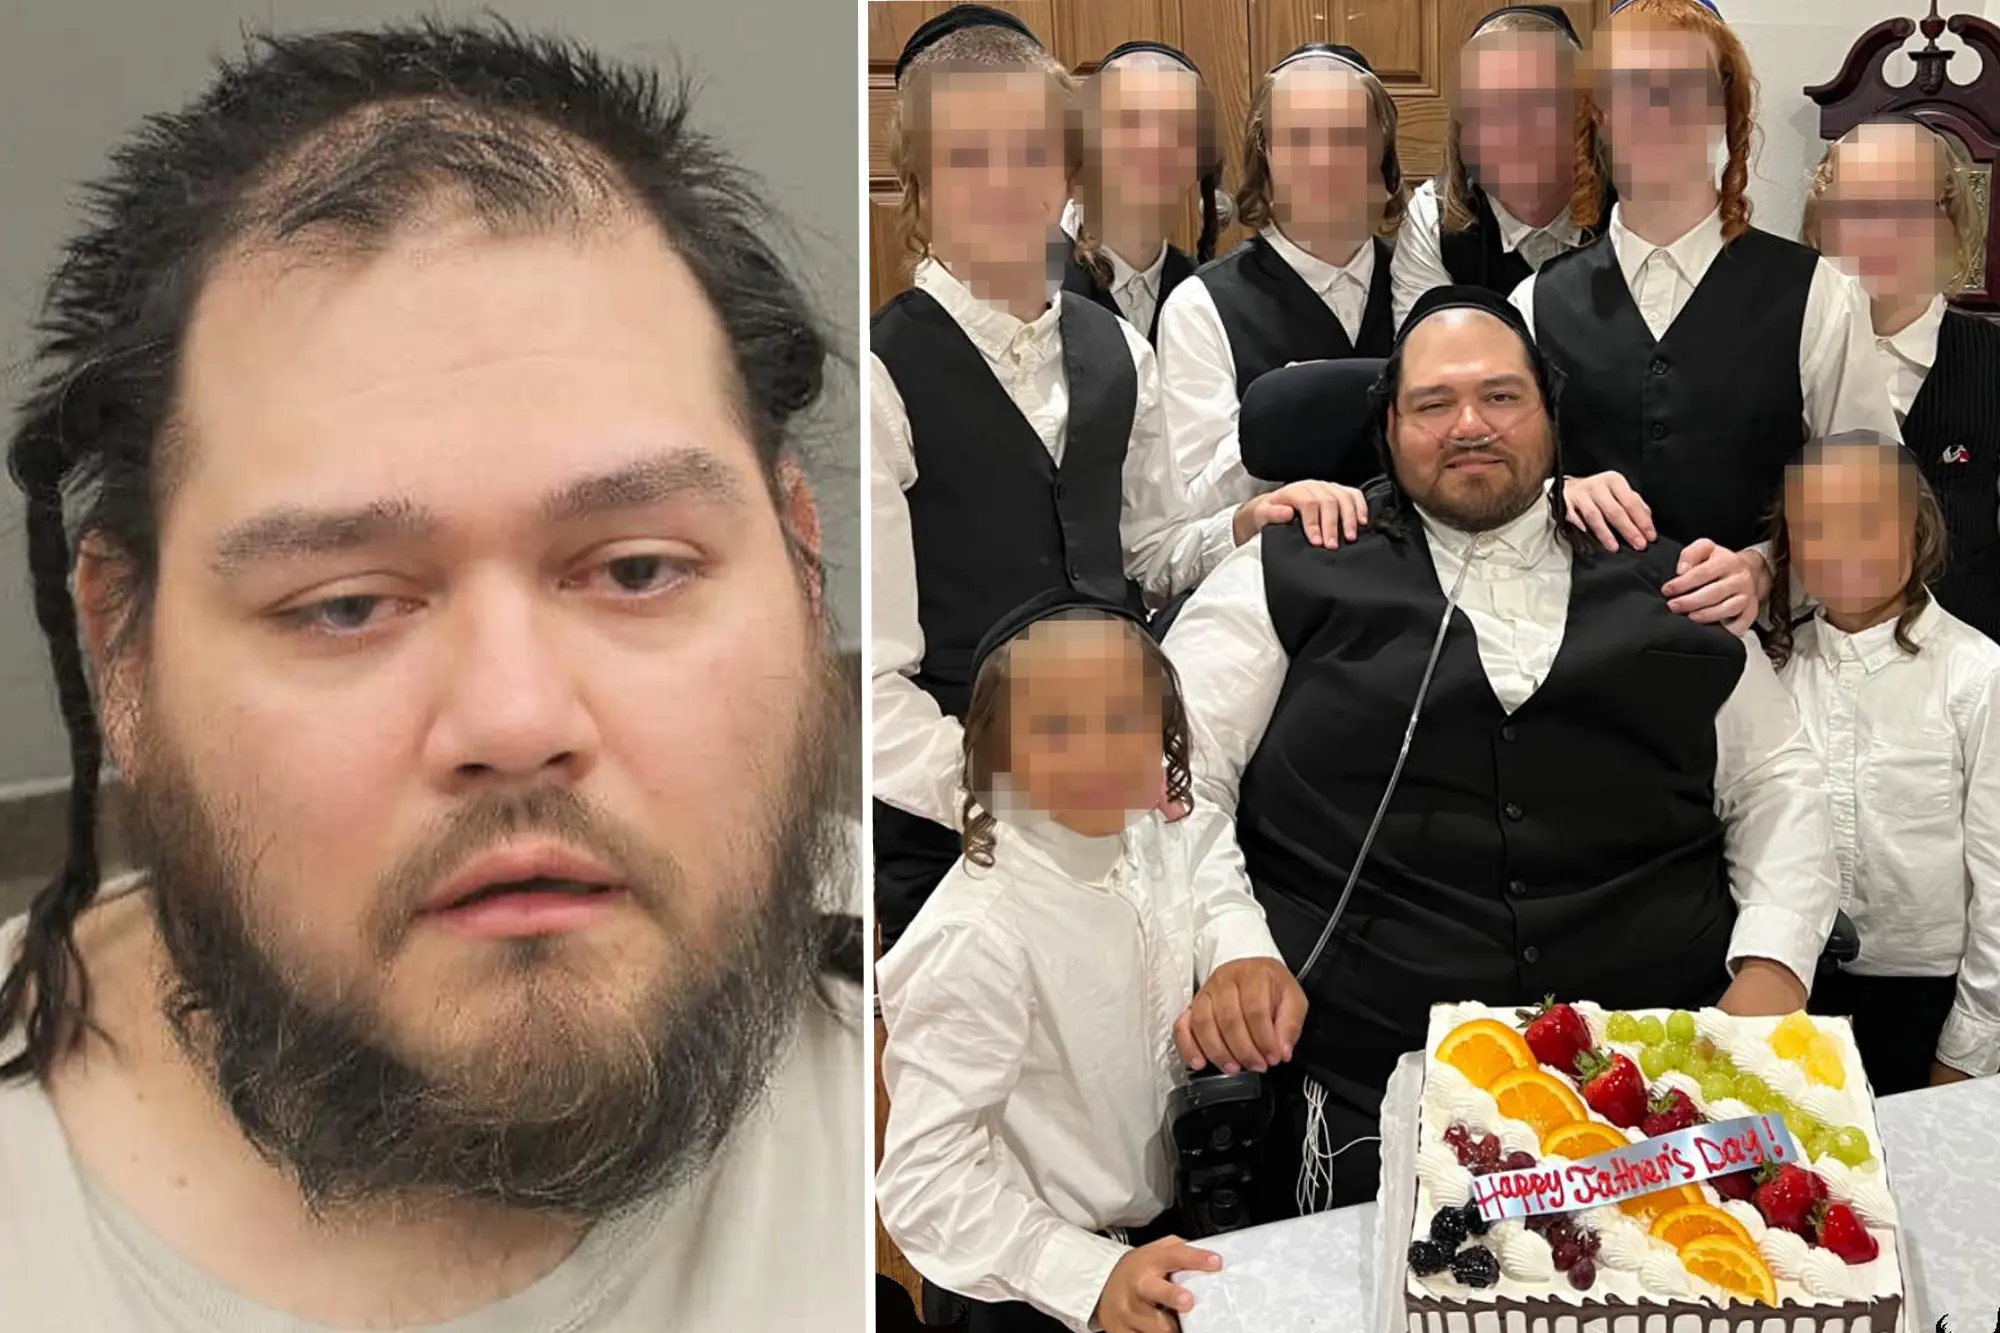 Houston TikTok-famous father charged with molesting his adopted sons